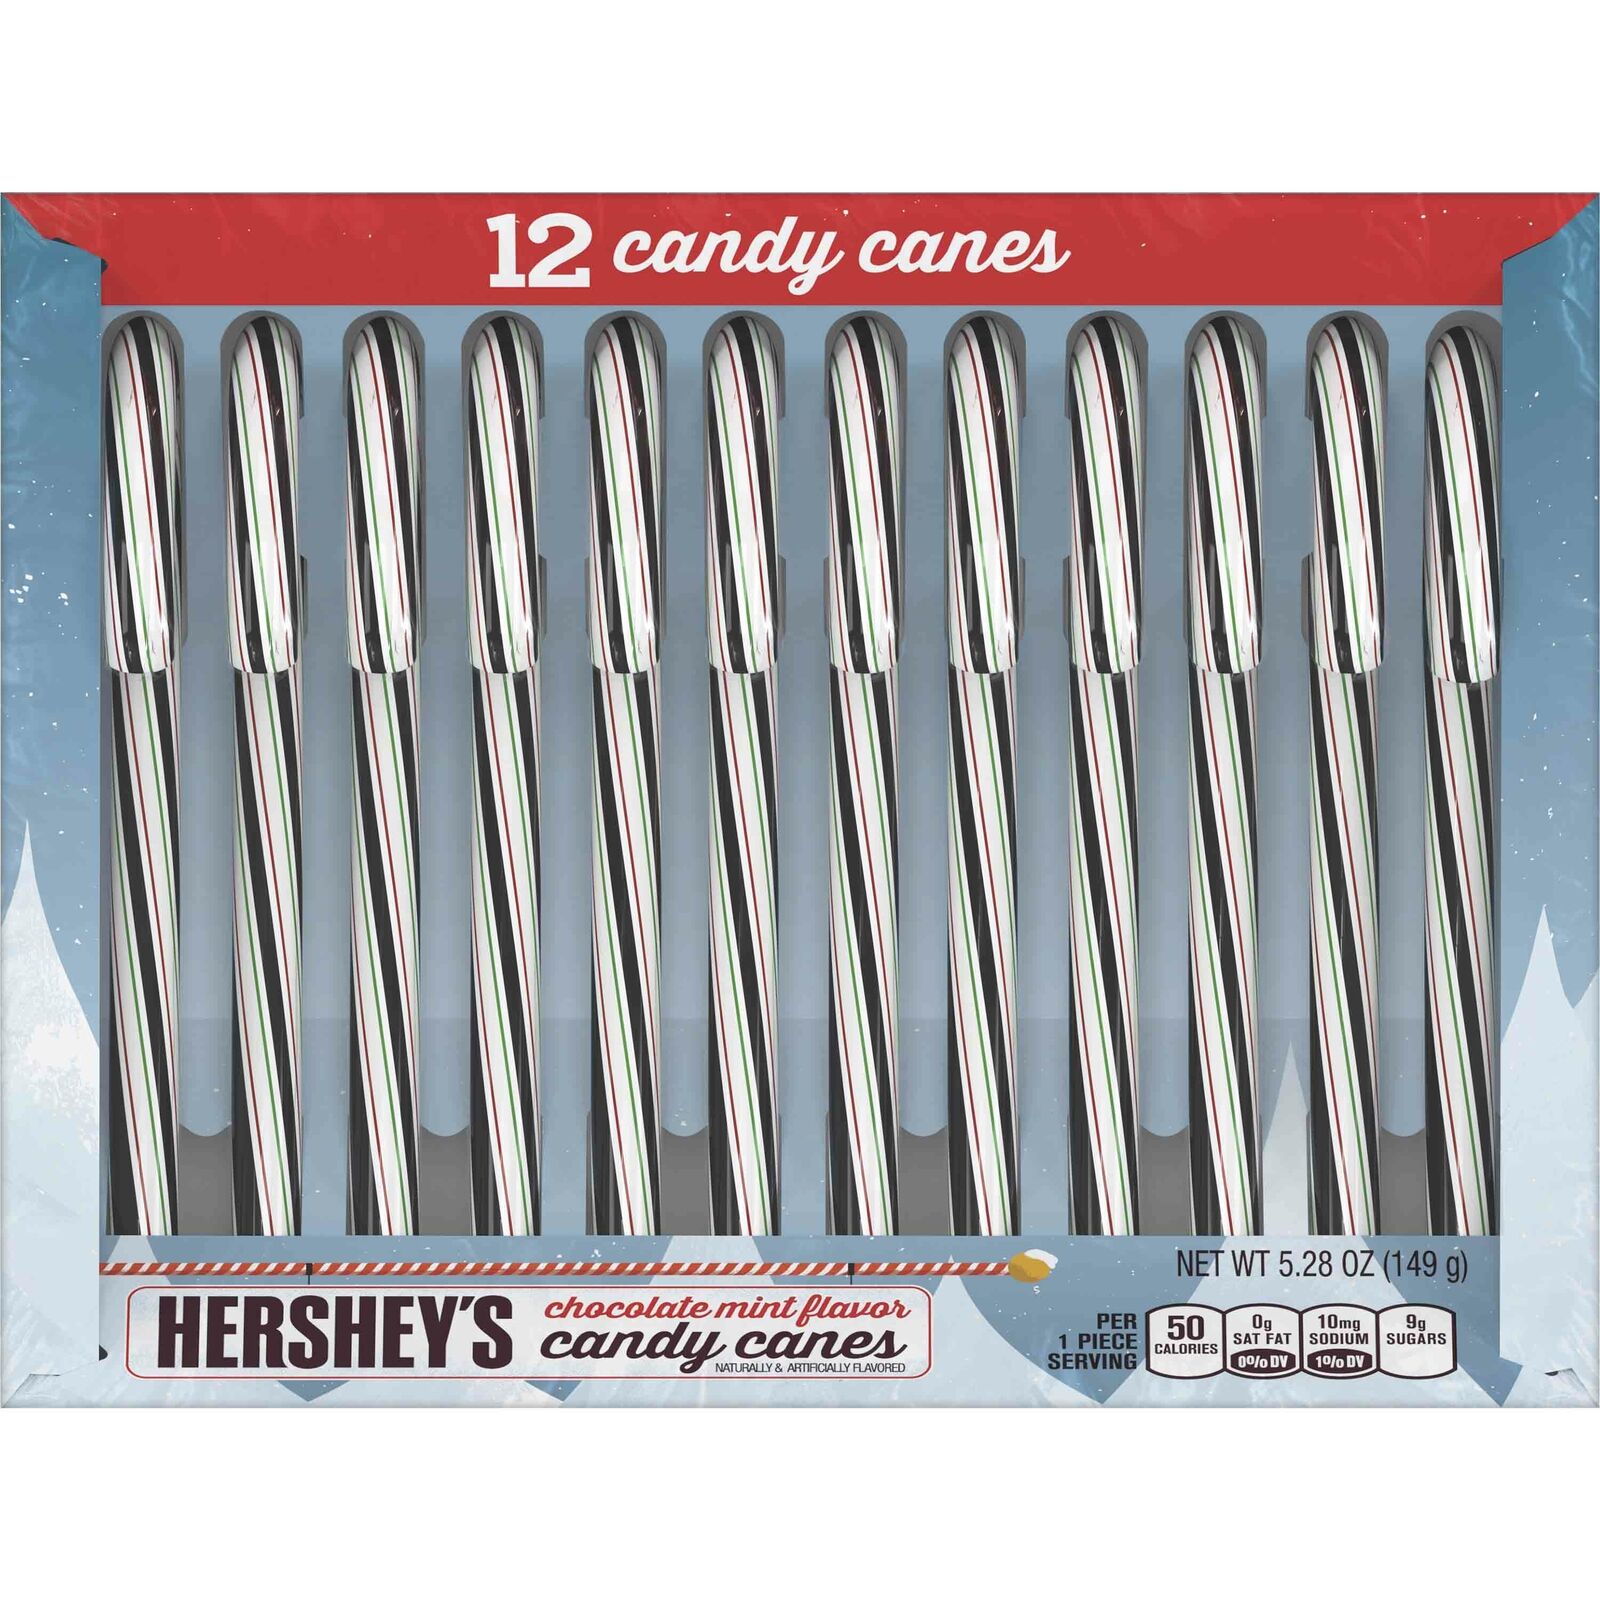 Hershey's, Holiday Mint Chocolate Candy Canes, 5.28 Oz